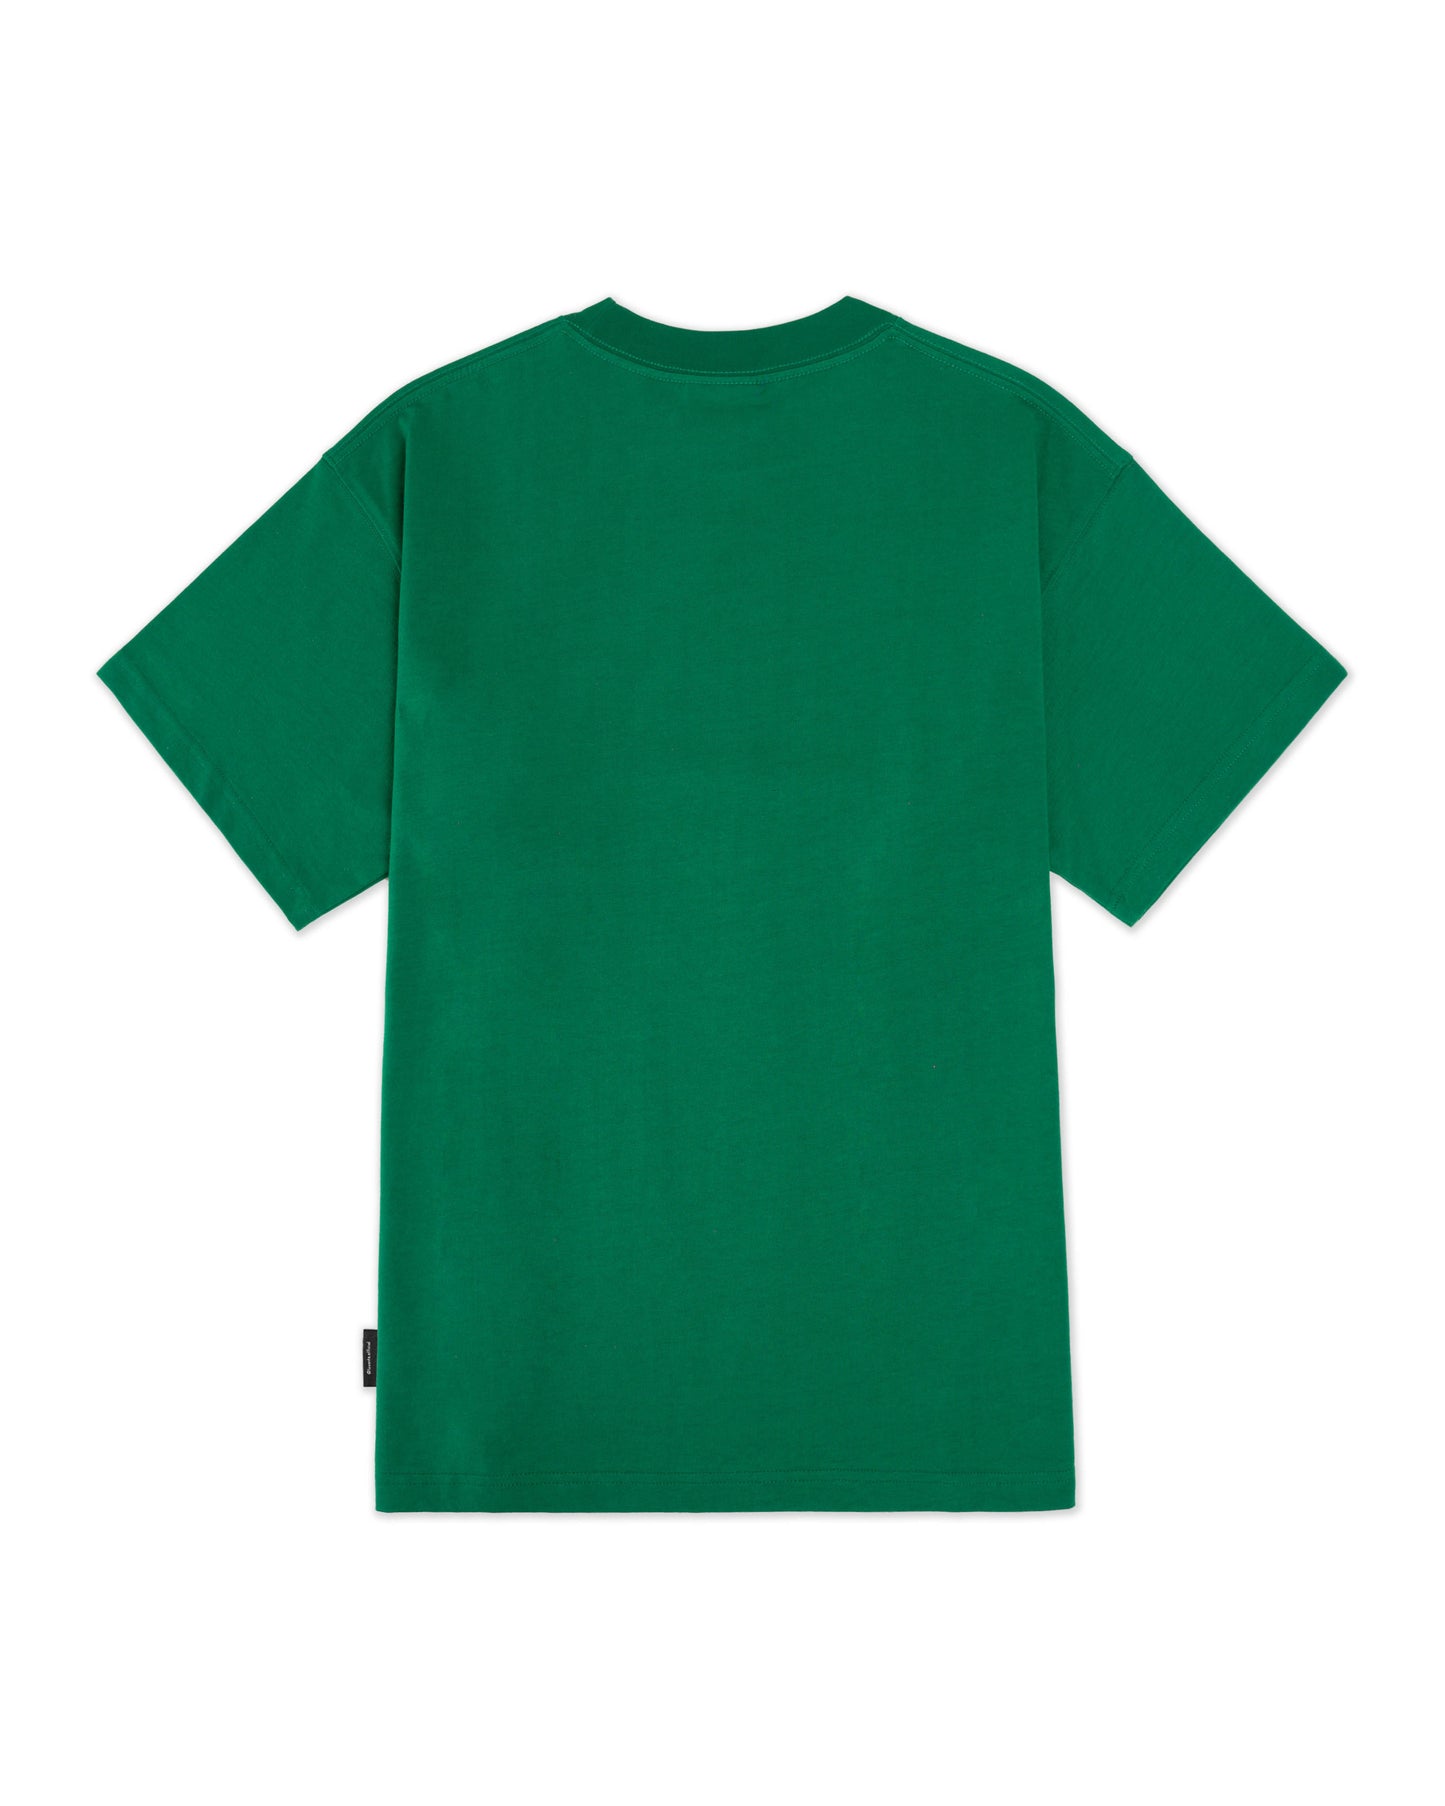 Levents® Paradise Tee/ Green